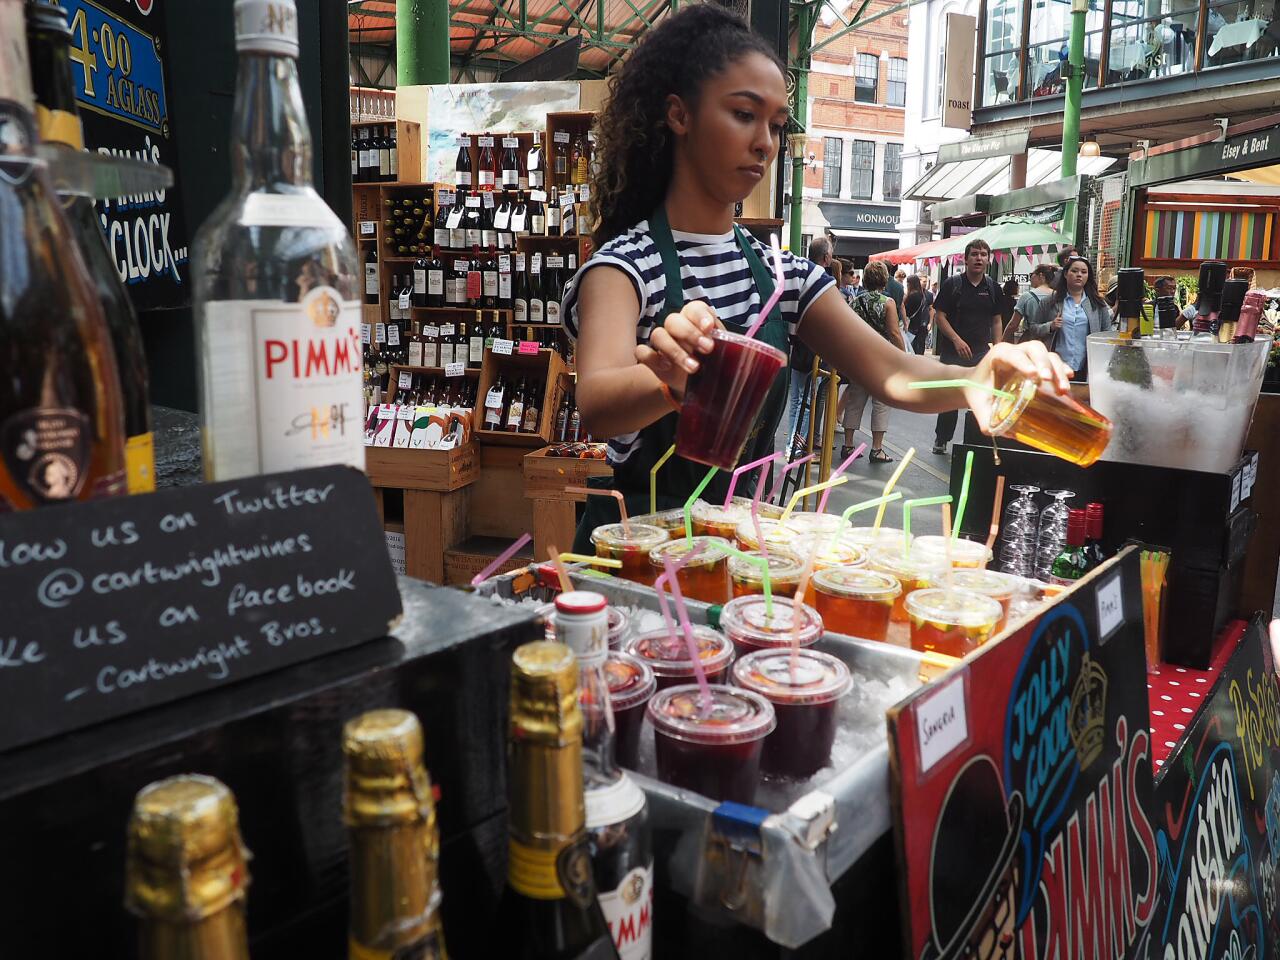 A selection of sangria and Pimm's Cups from the Cartwright Brothers stand at Borough Market in London.